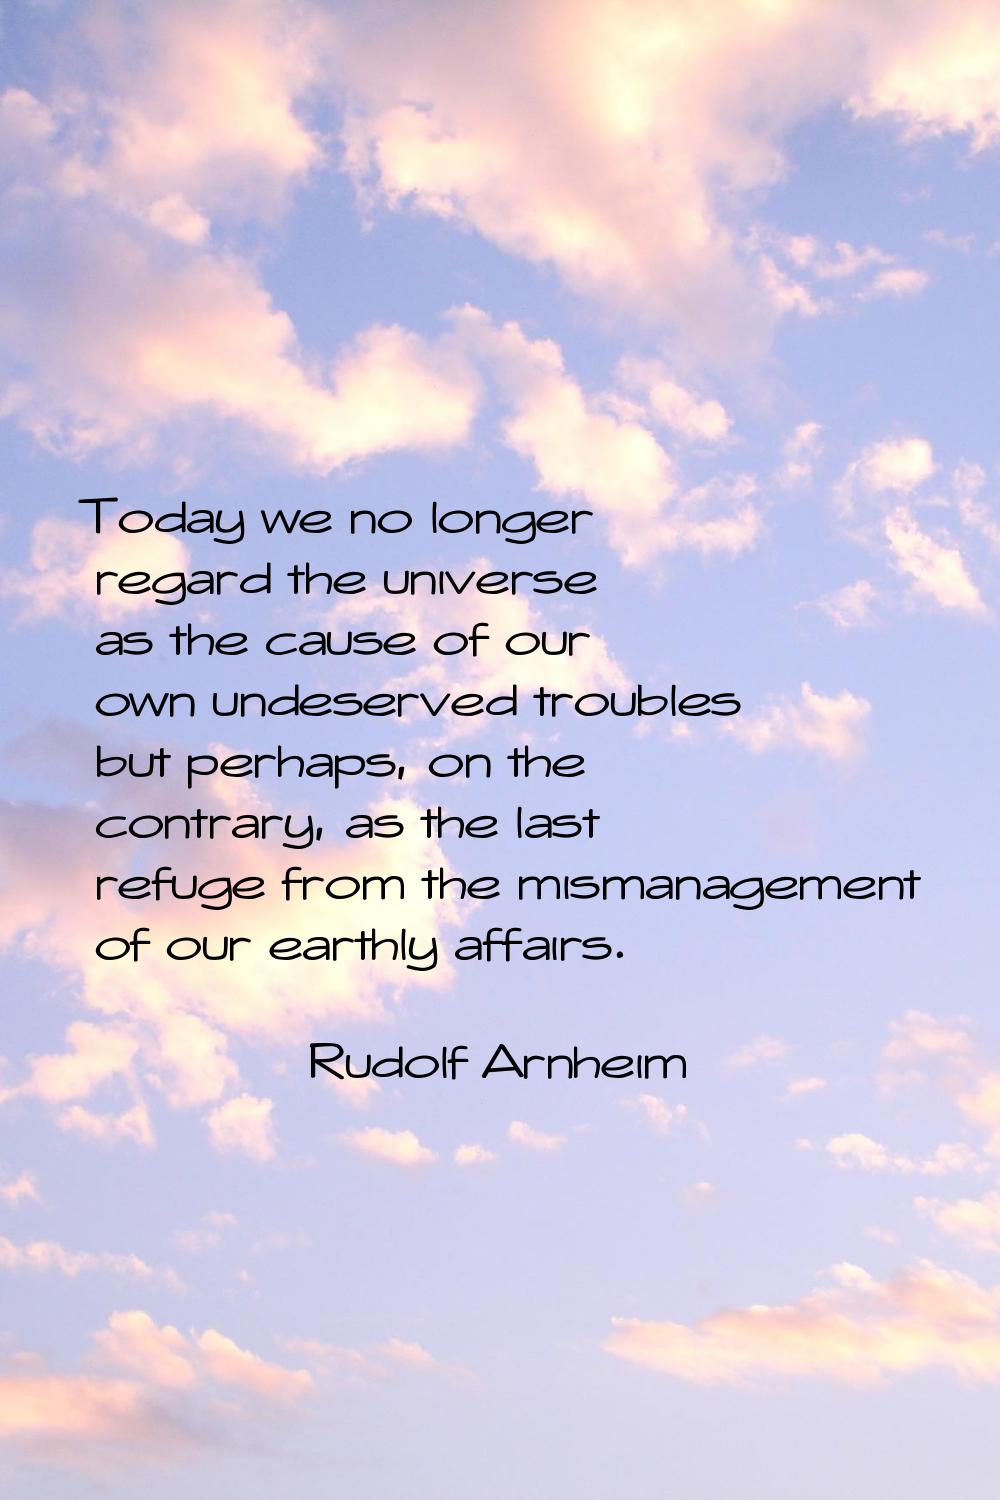 Today we no longer regard the universe as the cause of our own undeserved troubles but perhaps, on 